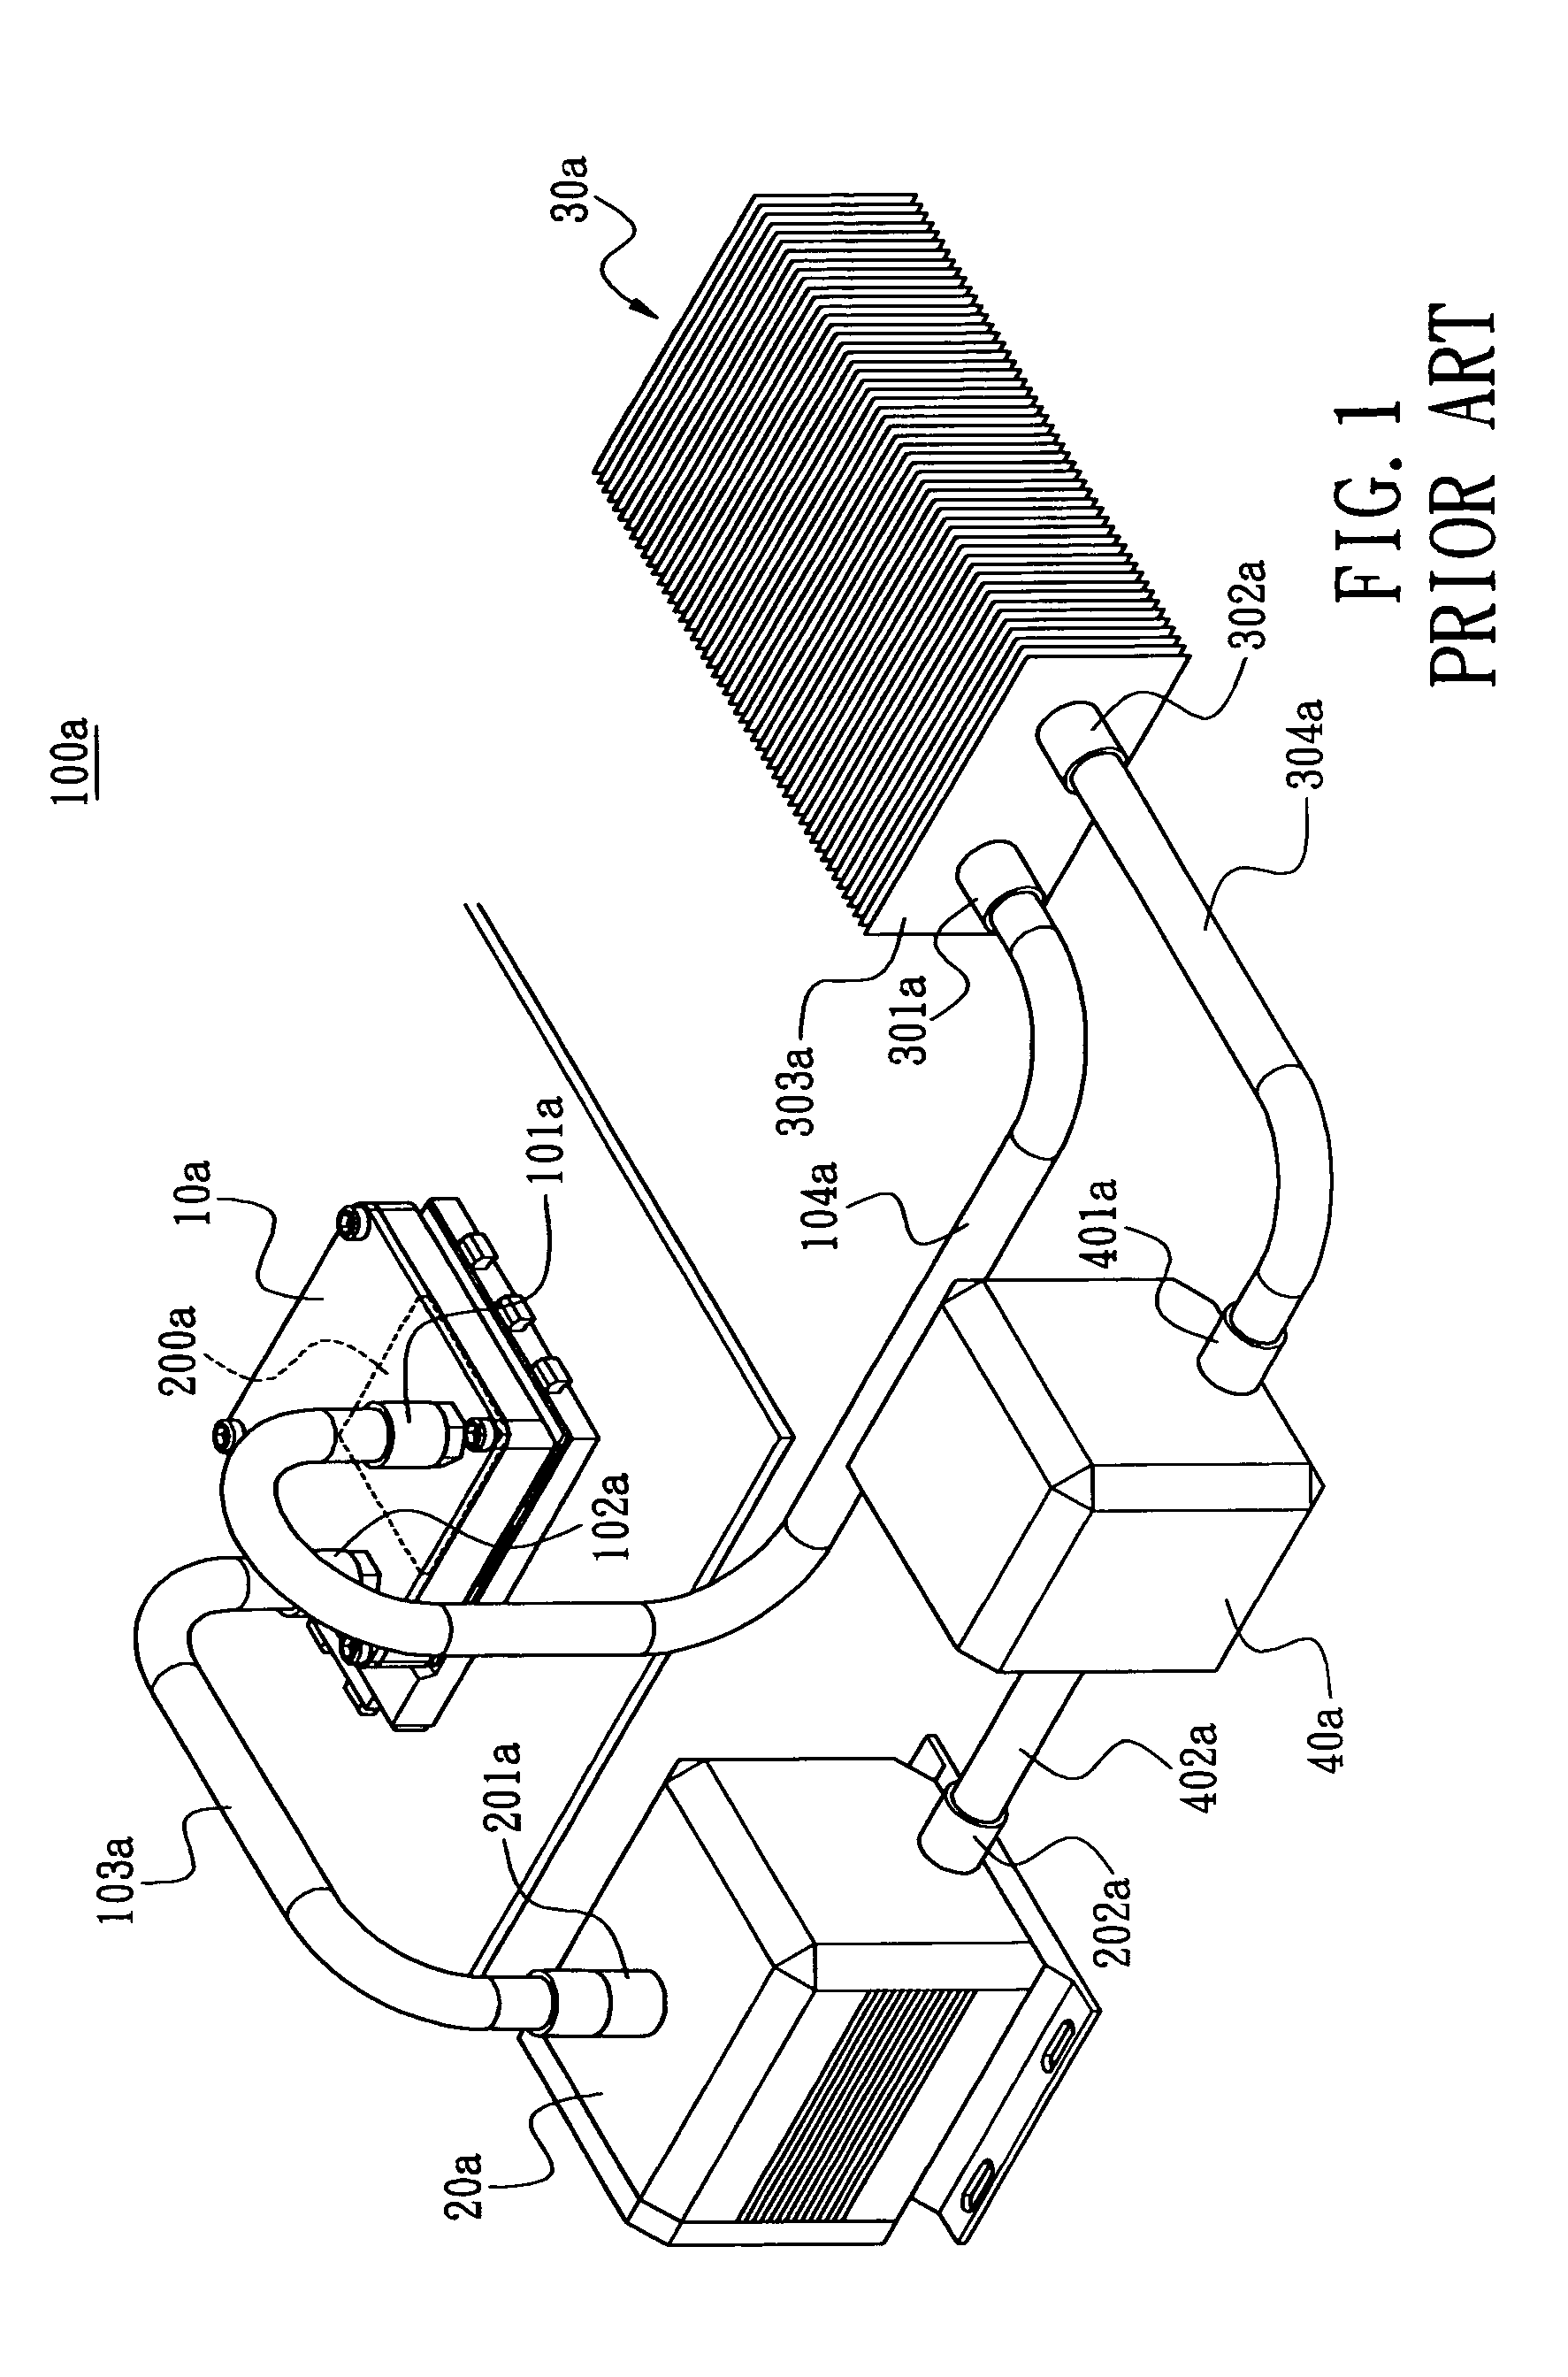 Liquid-cooling heat dissipation assembly